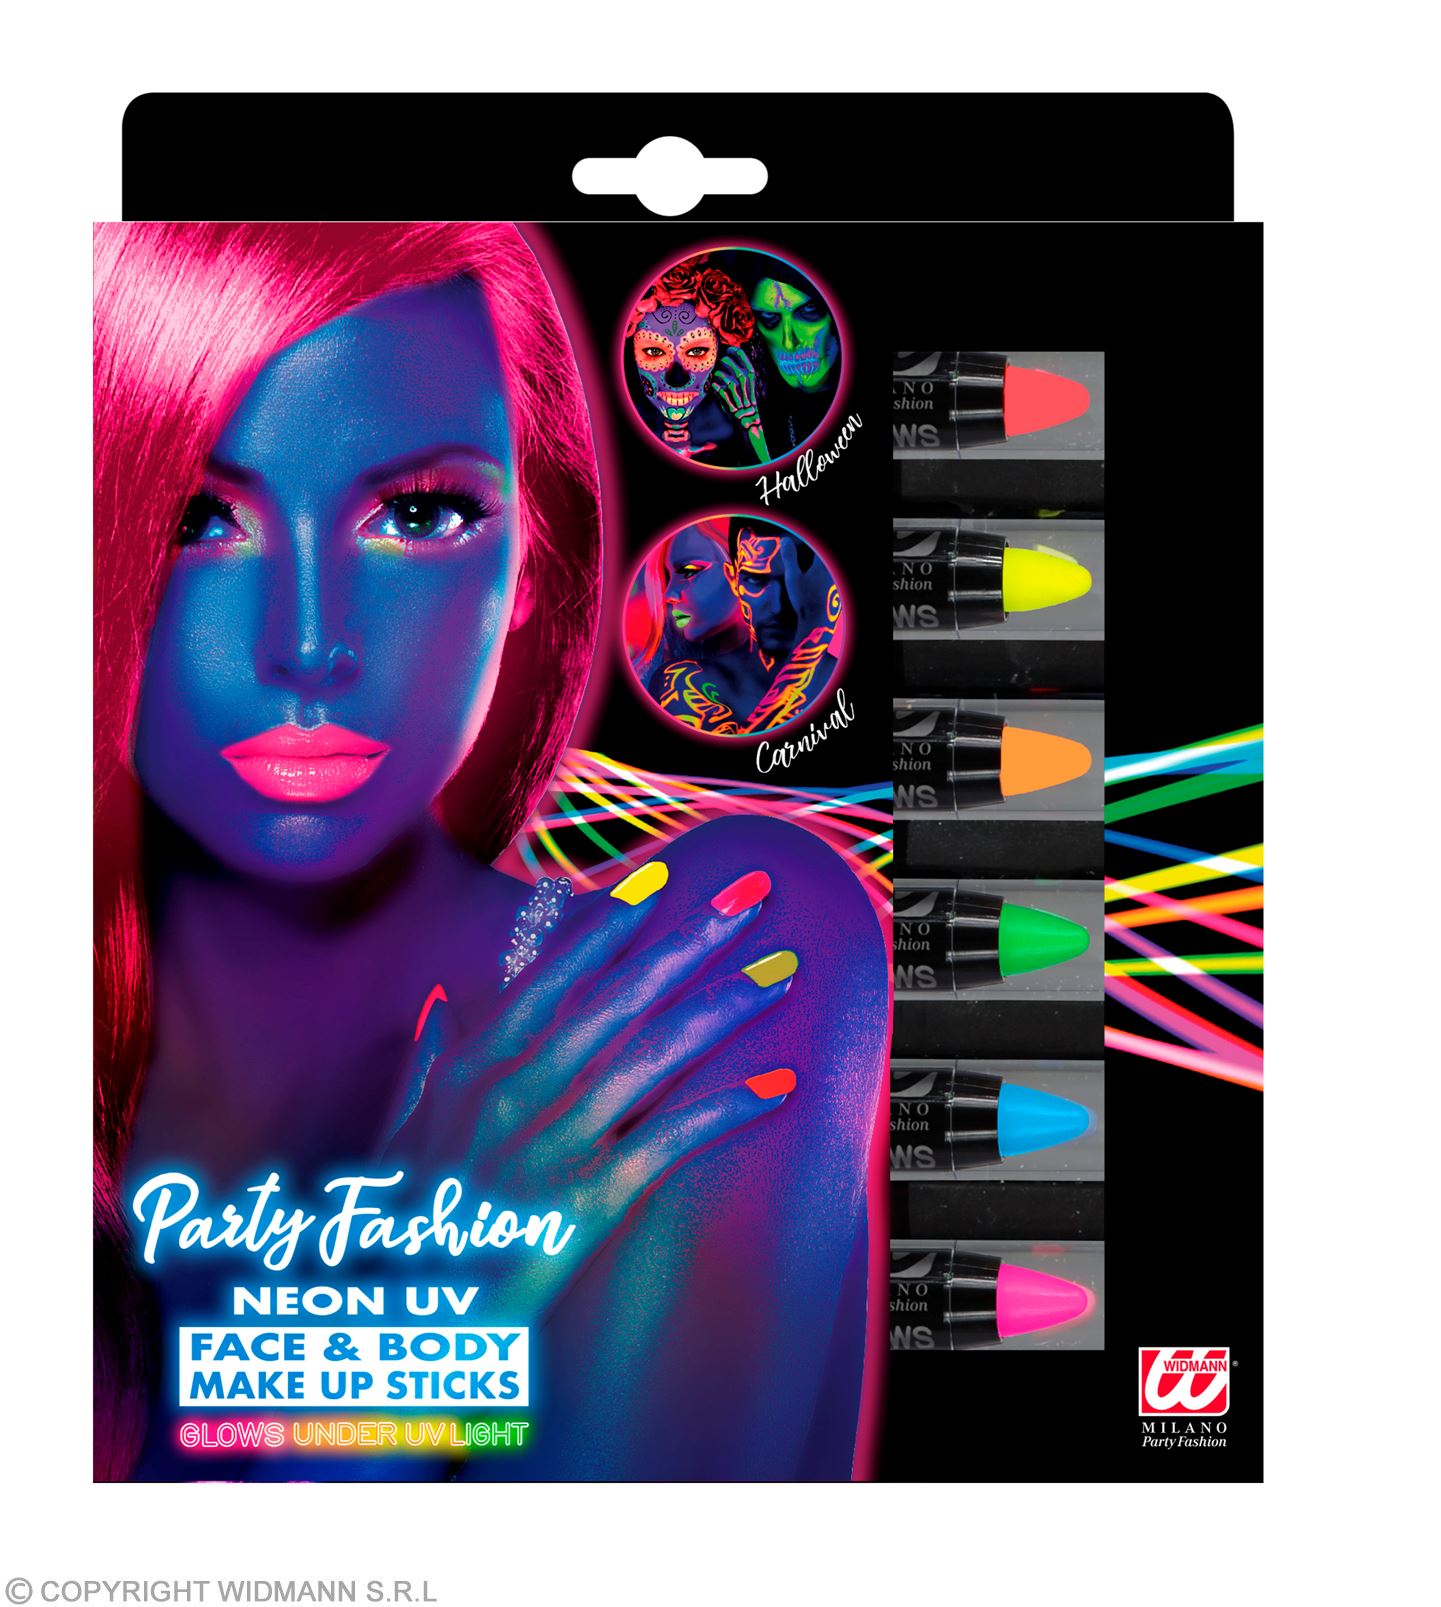 Crayons de maquillage Twist - 6 couleurs fluo - Maquillage - 10 Doigts